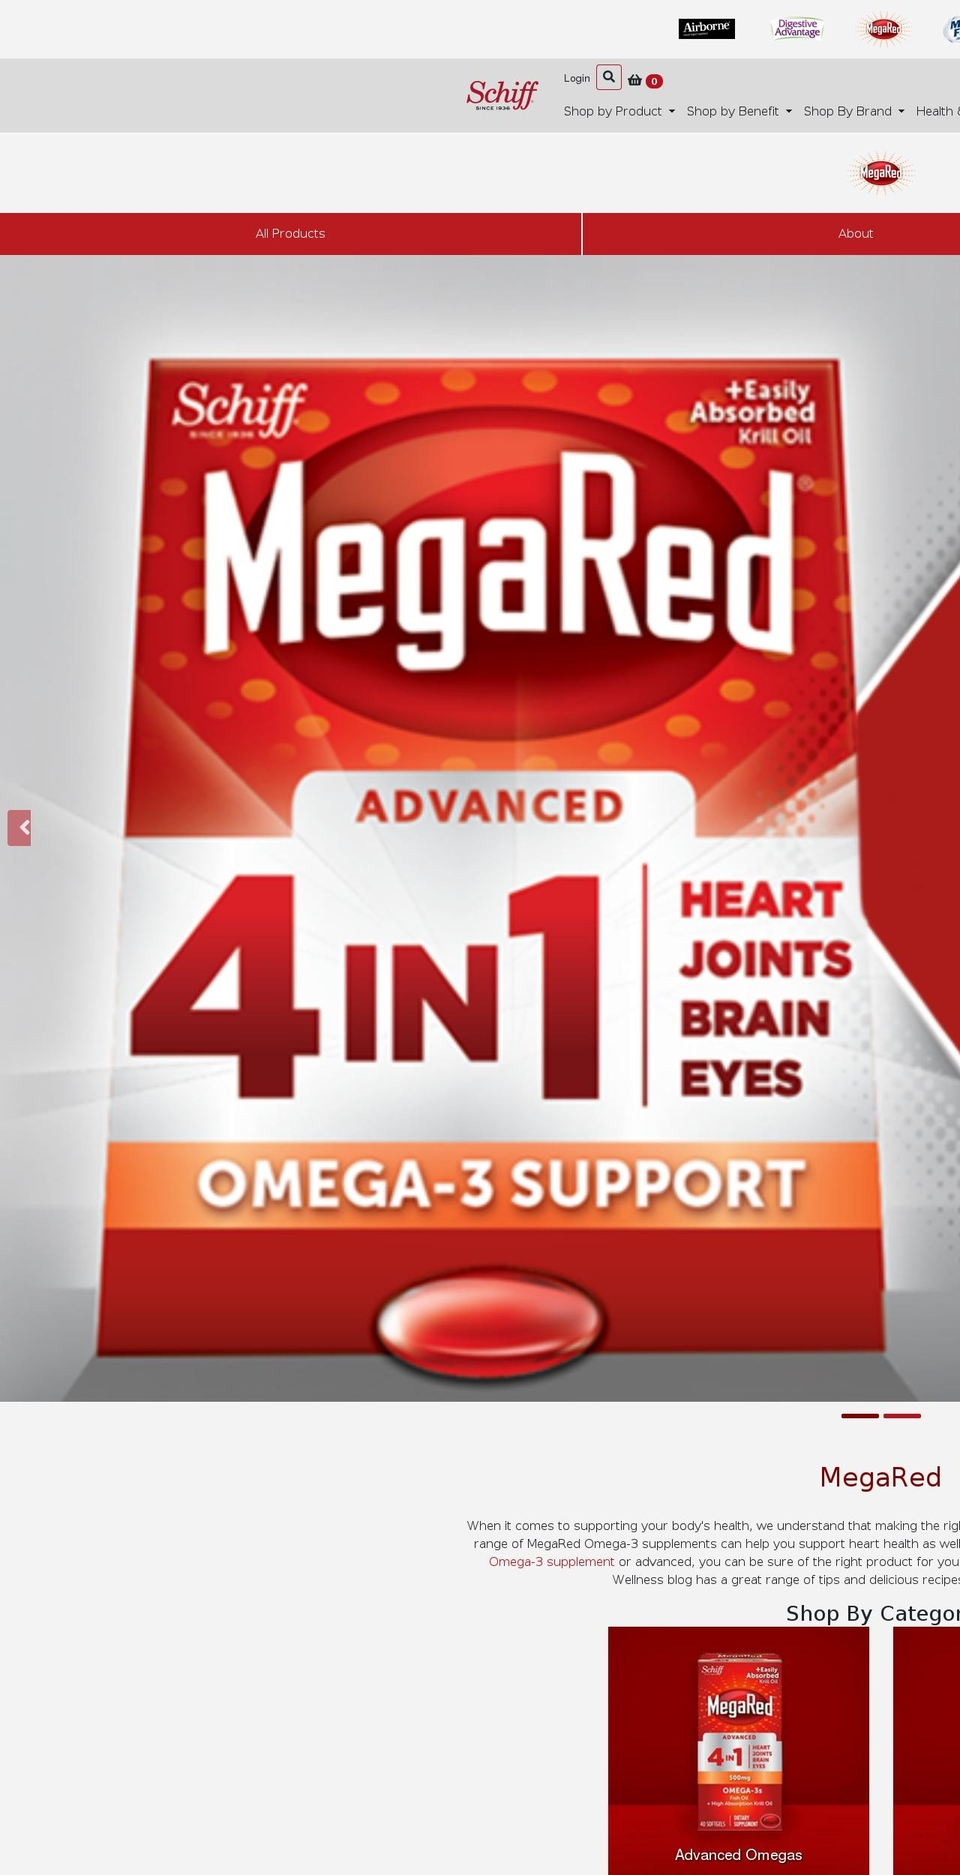 Schiff Vitamins - Updated 8\/3 Shopify theme site example megared.us